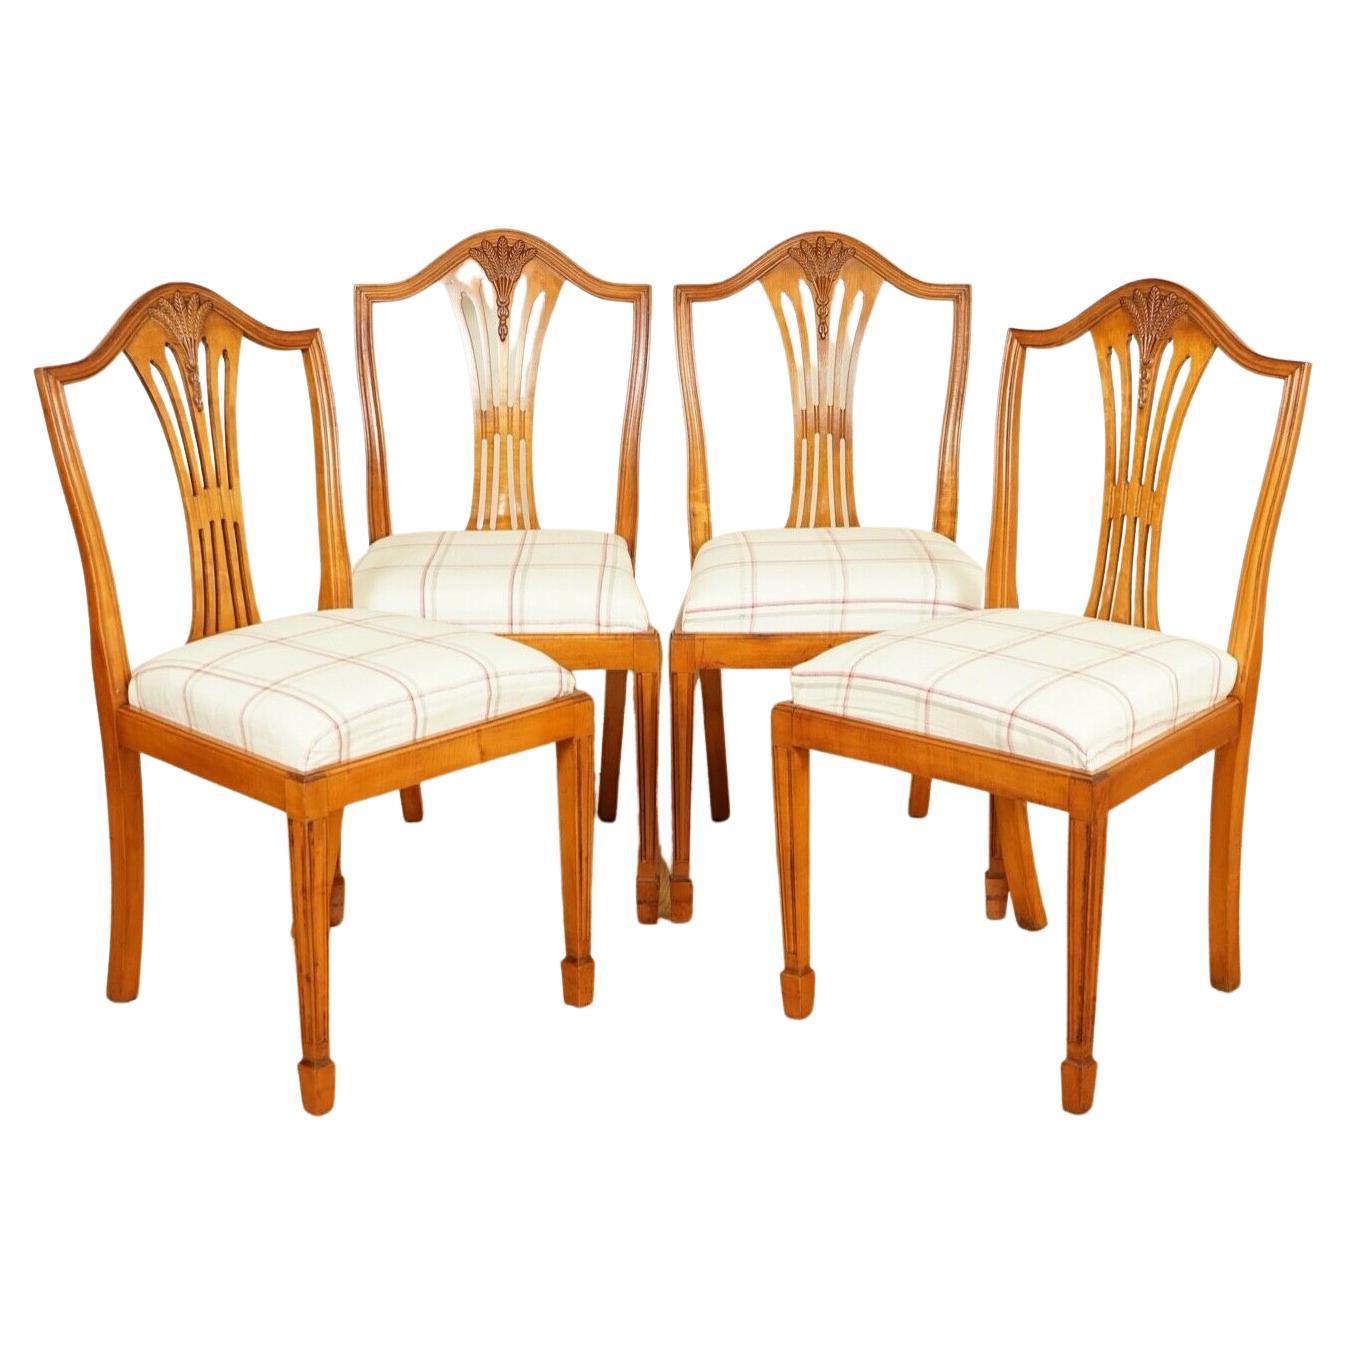 Very Lovely Brights of Nettlebed Wheatear Yew Wood Dinning Chairs